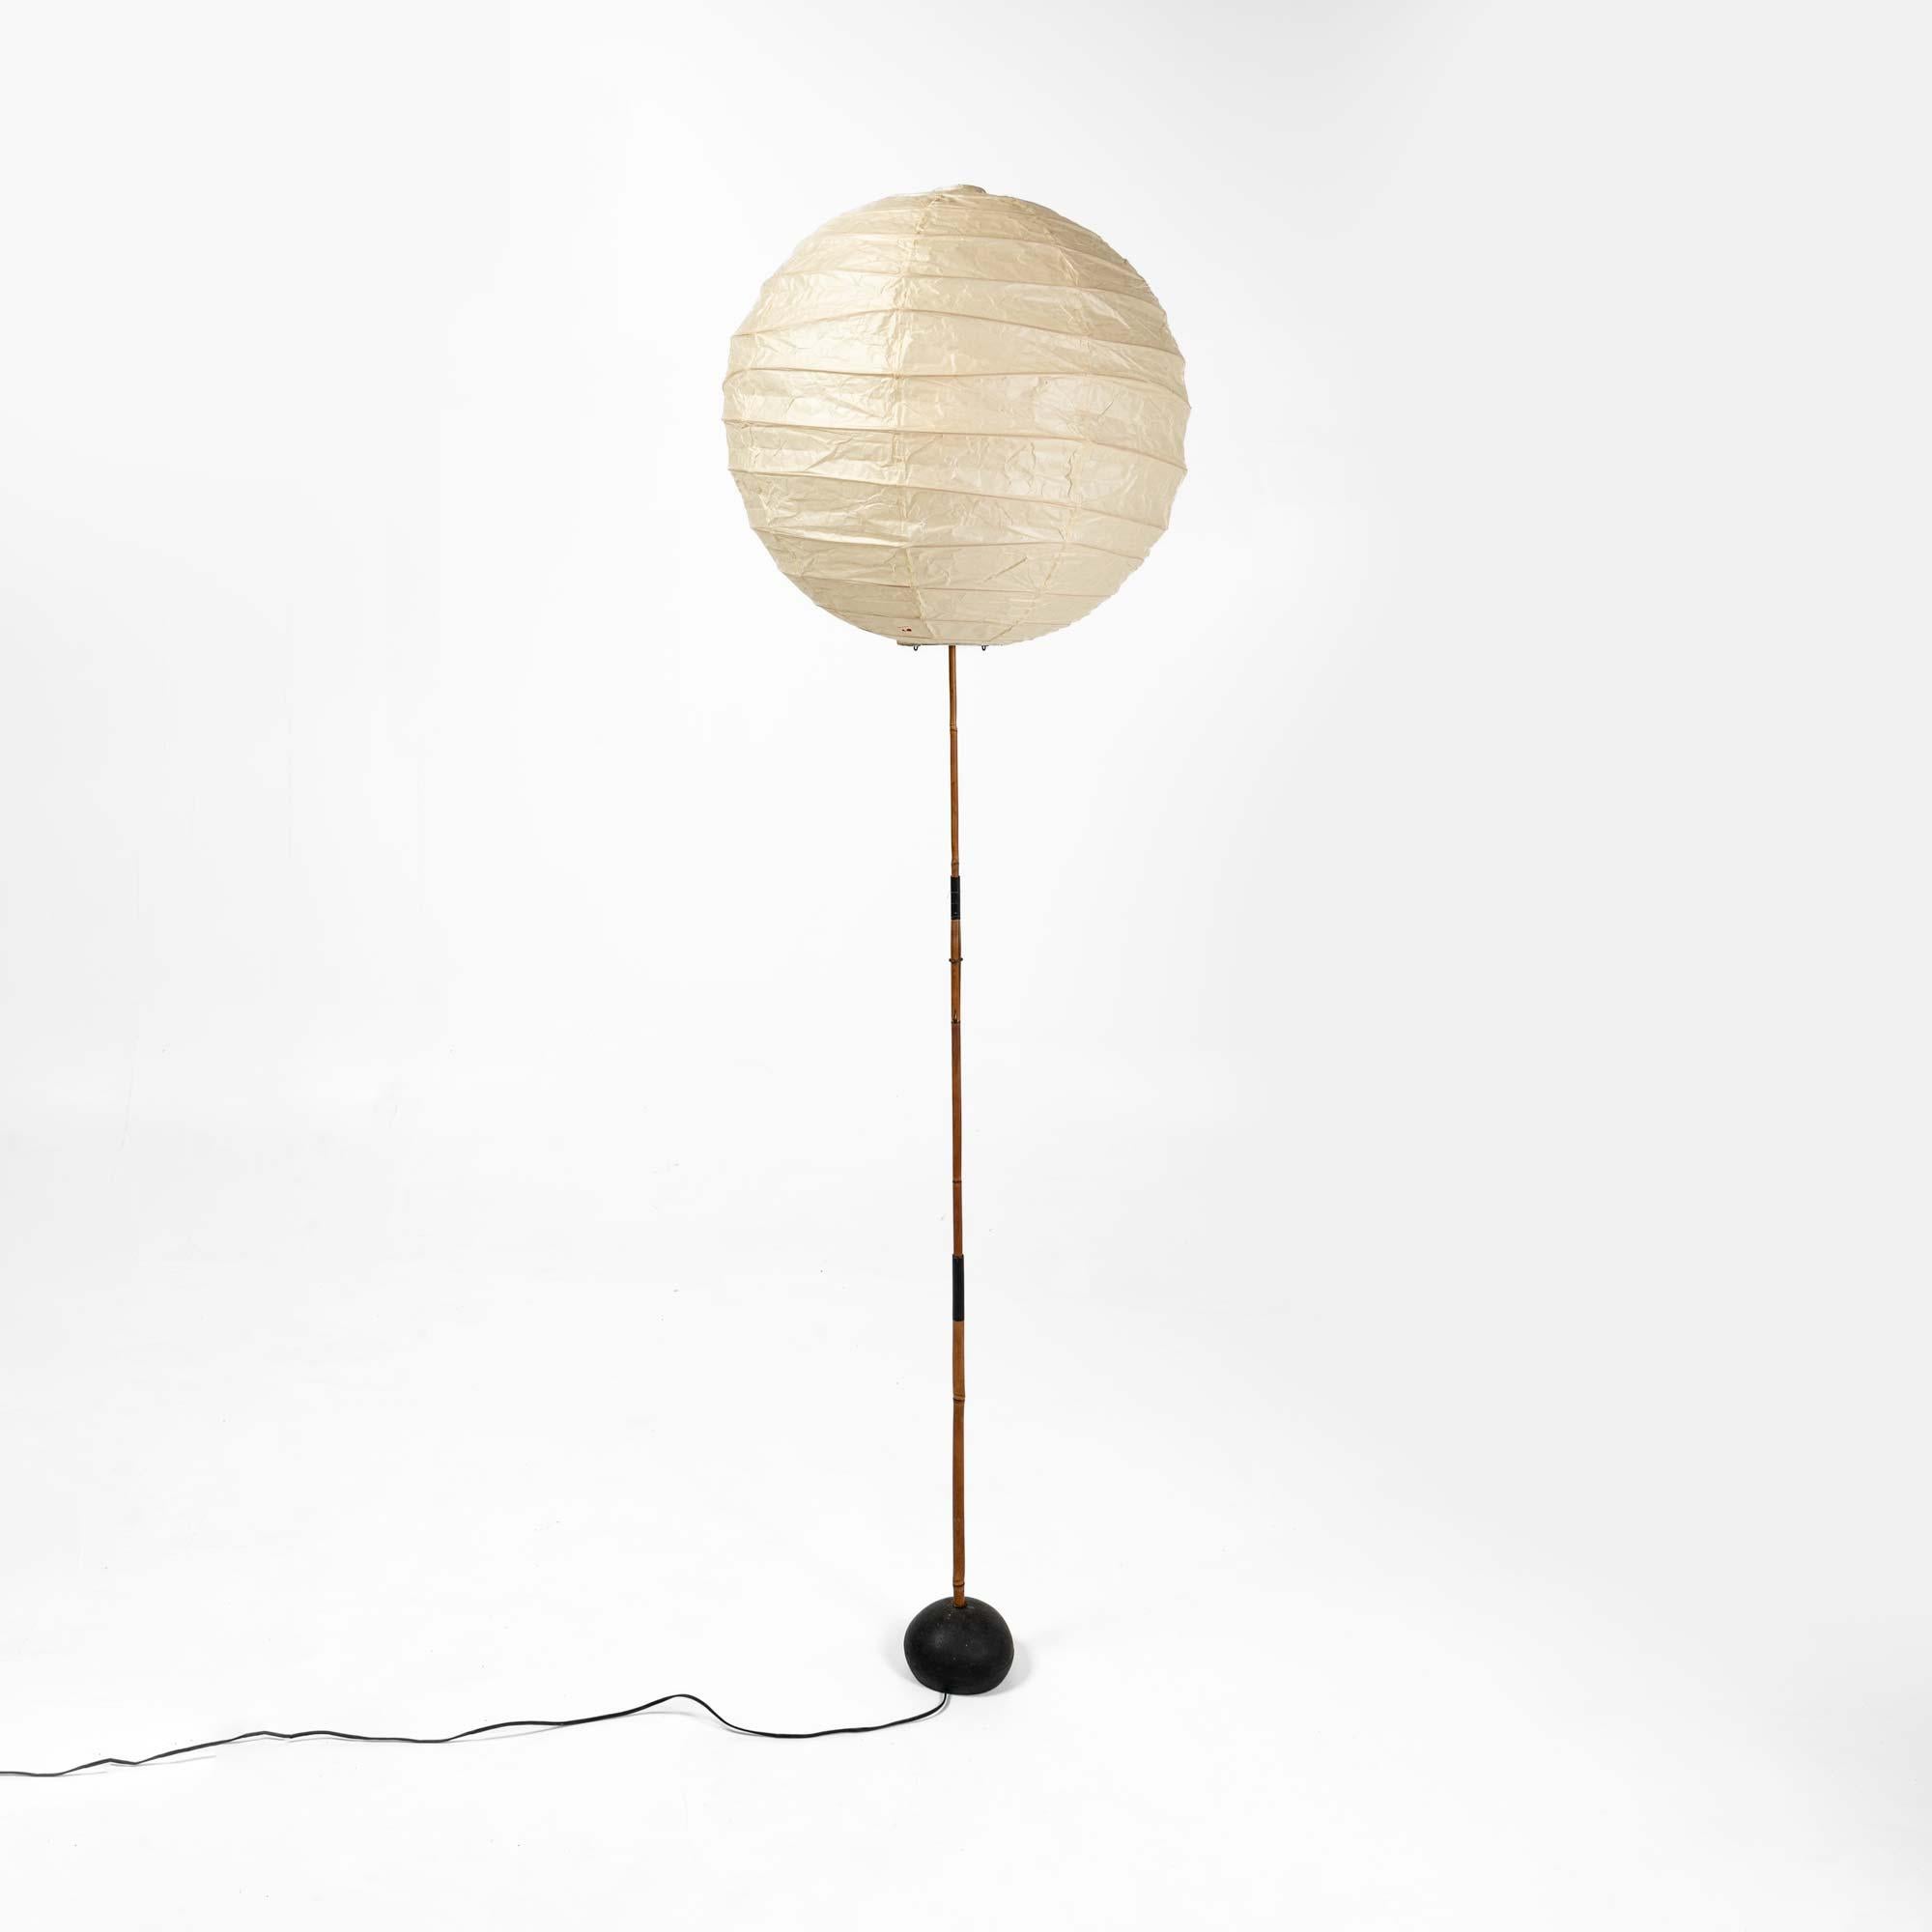 An iconic and early vintage Isamu Noguchi Akari floor lamp, 55d shade on bb3 base, made with Bamboo and enameled steel with a paper shade. 

The 55d paper shade was purchased but rarely used, still in original brown paper packaging. Overall, it is